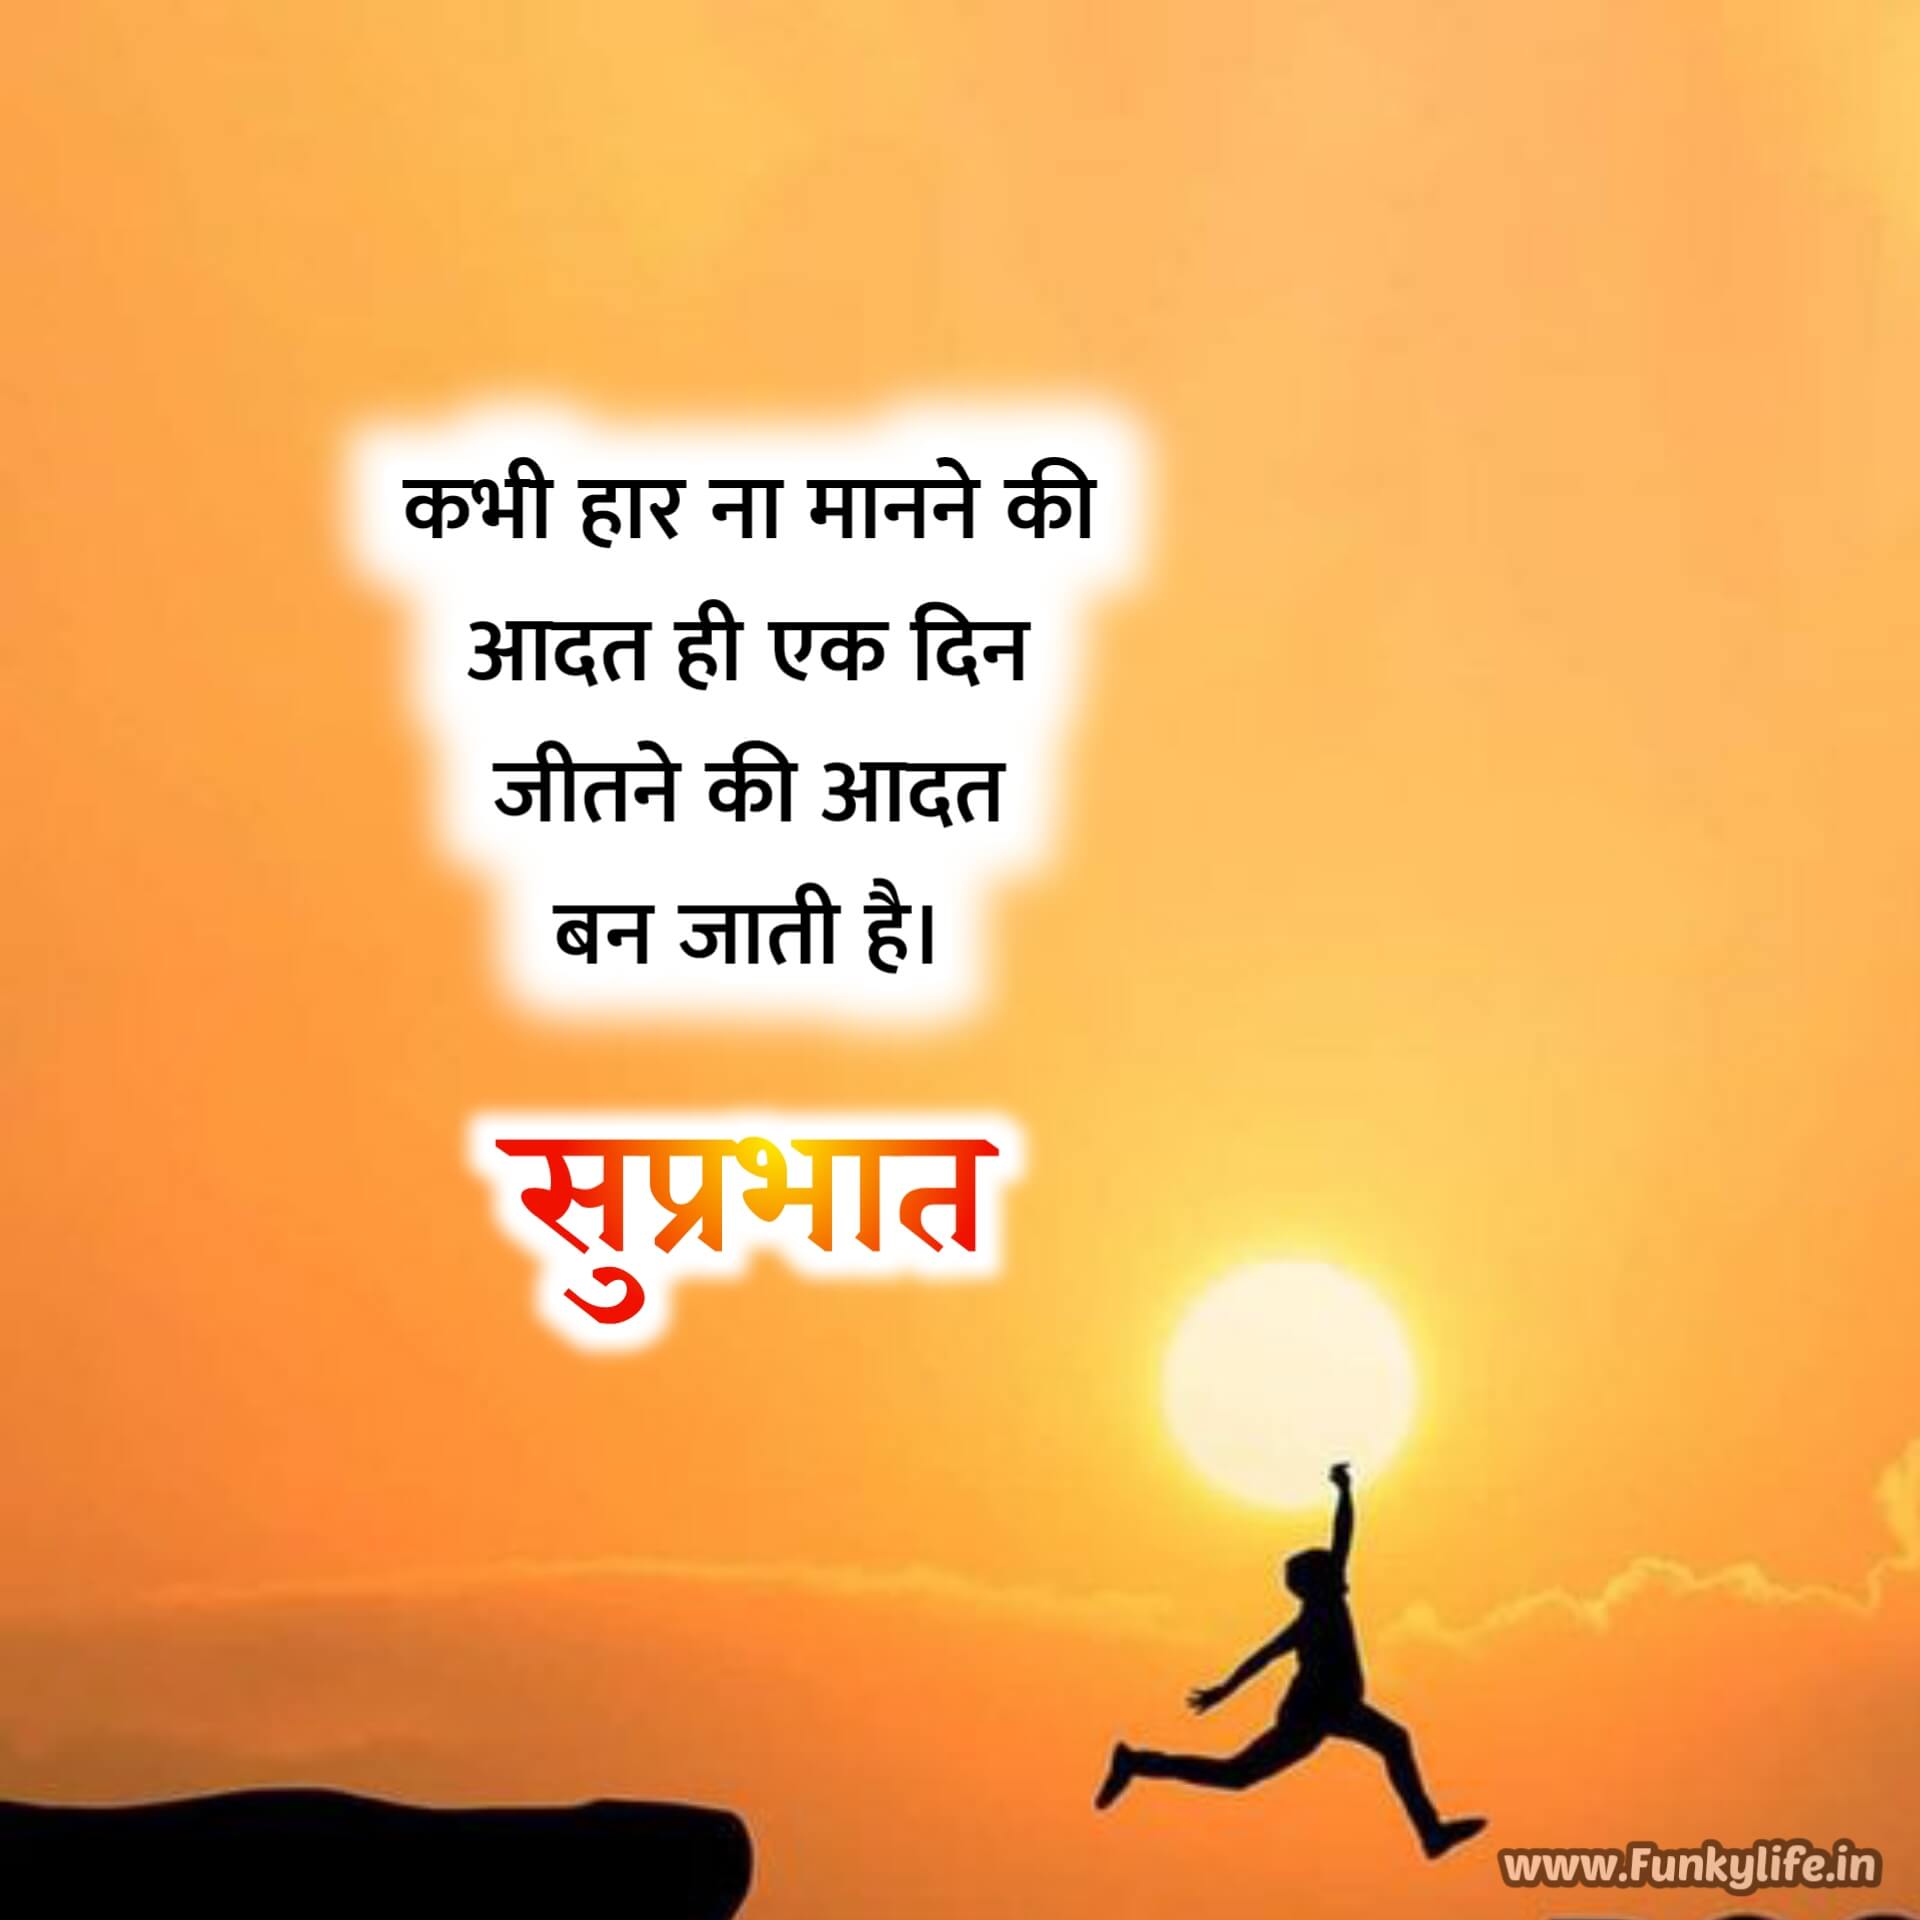 Motivational Good Morning Quotes in Hindi